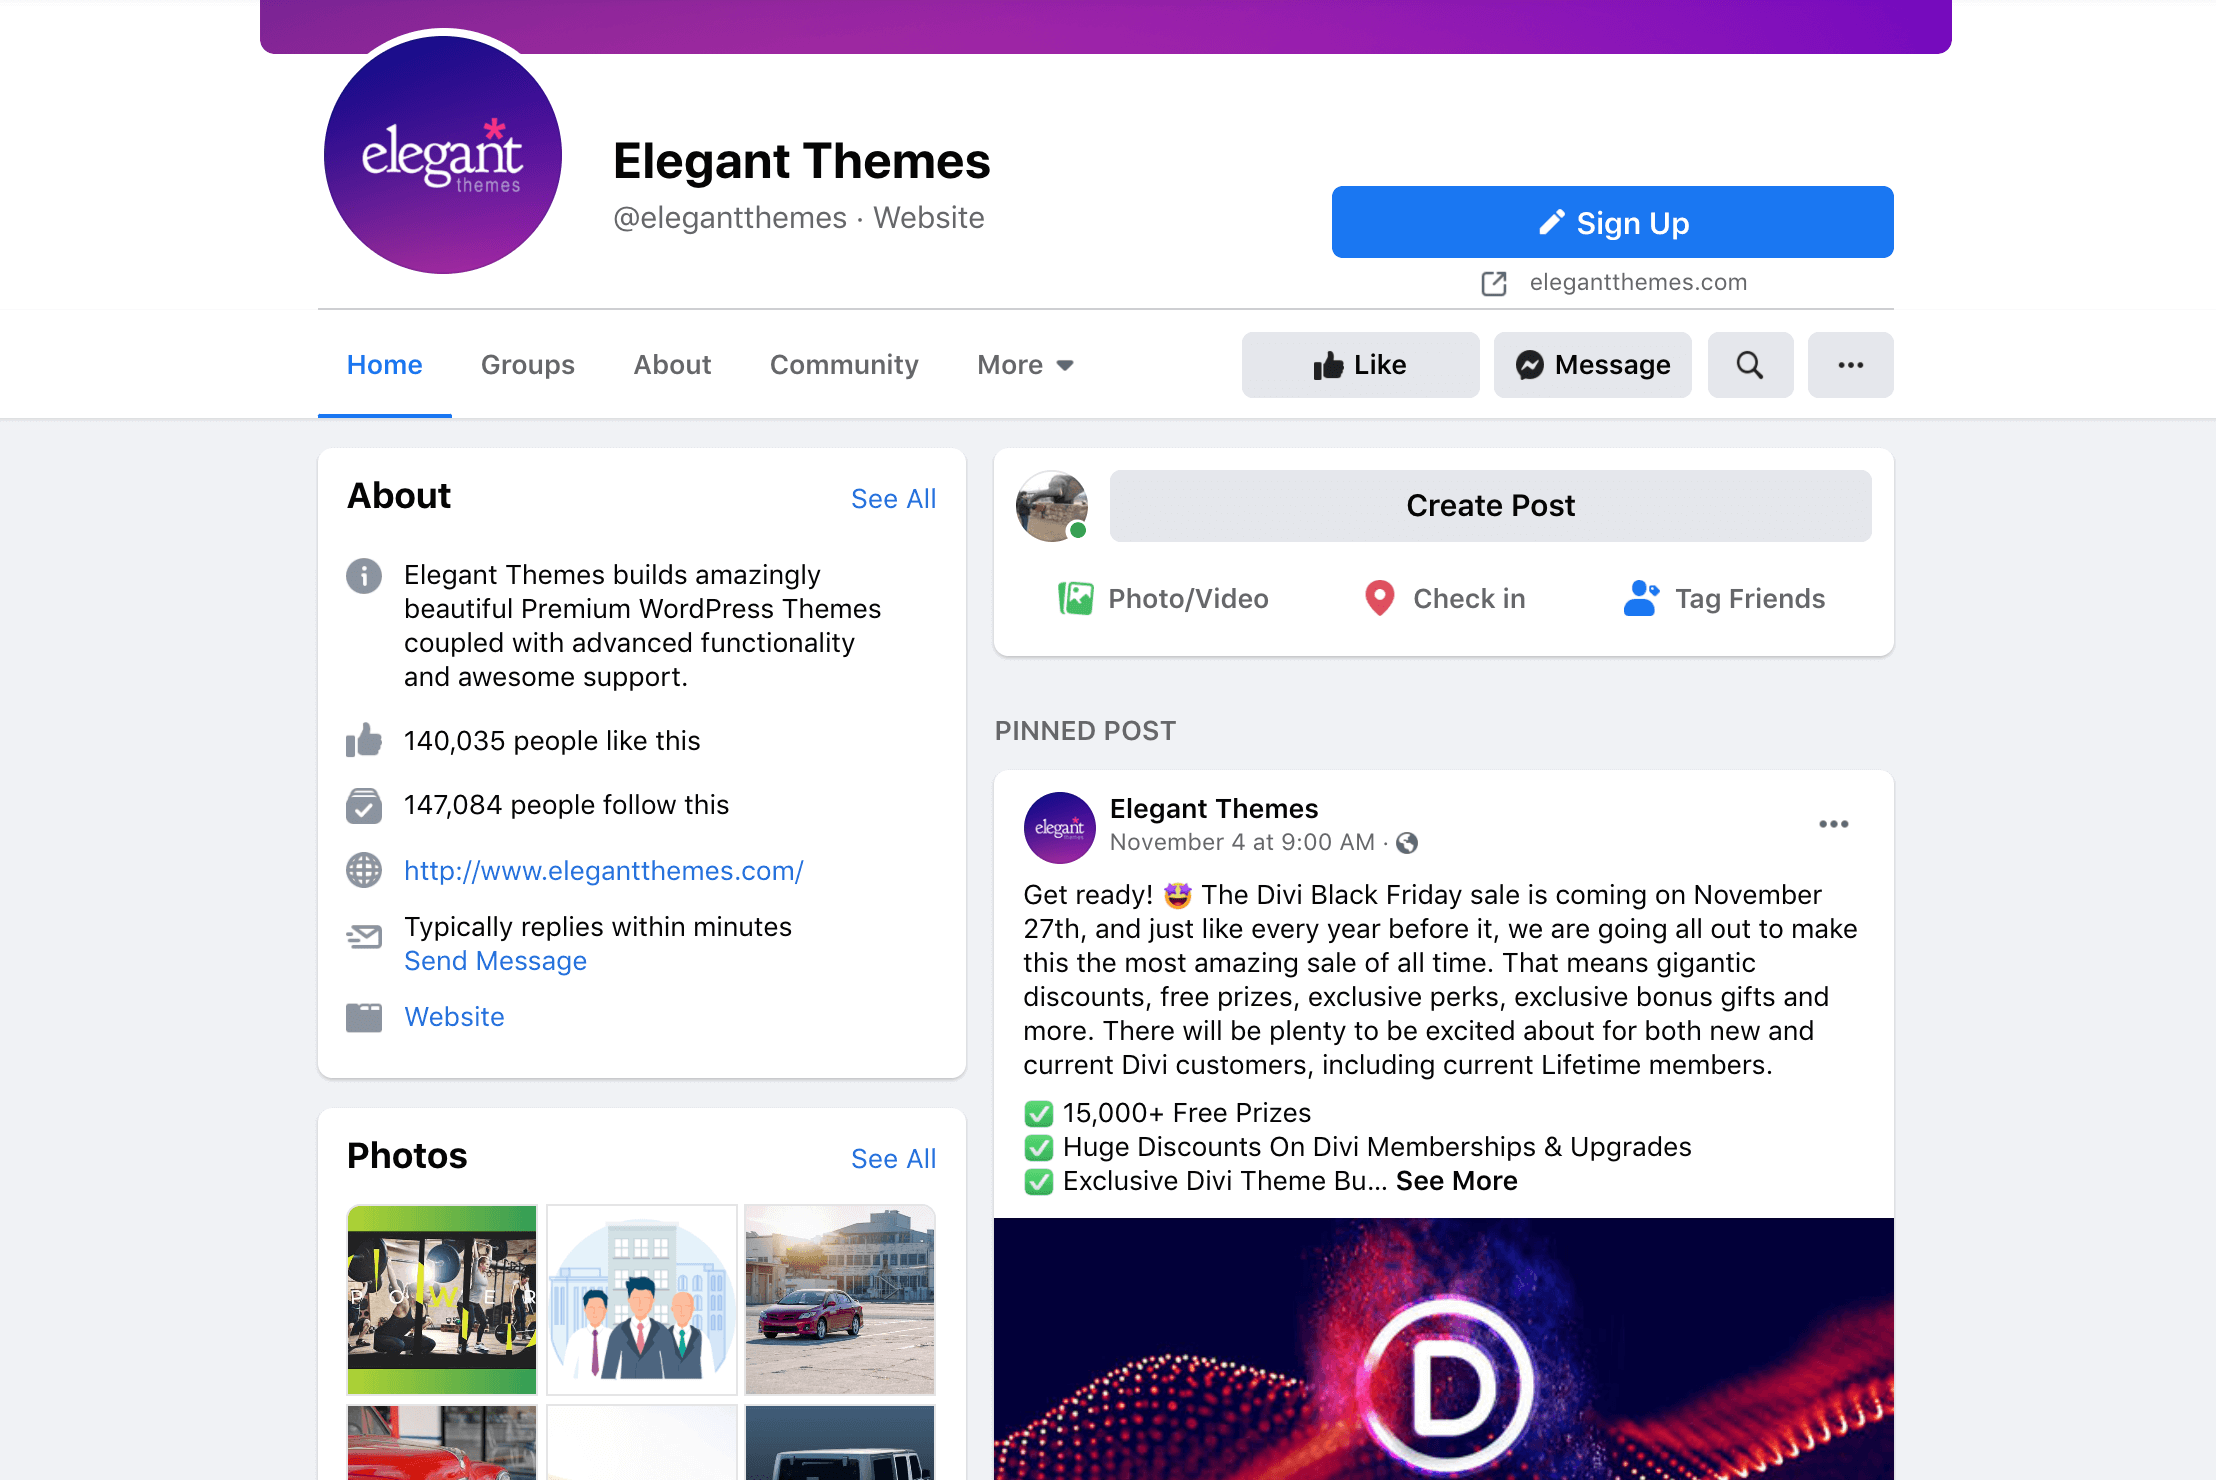 The Elegant Themes Facebook page.